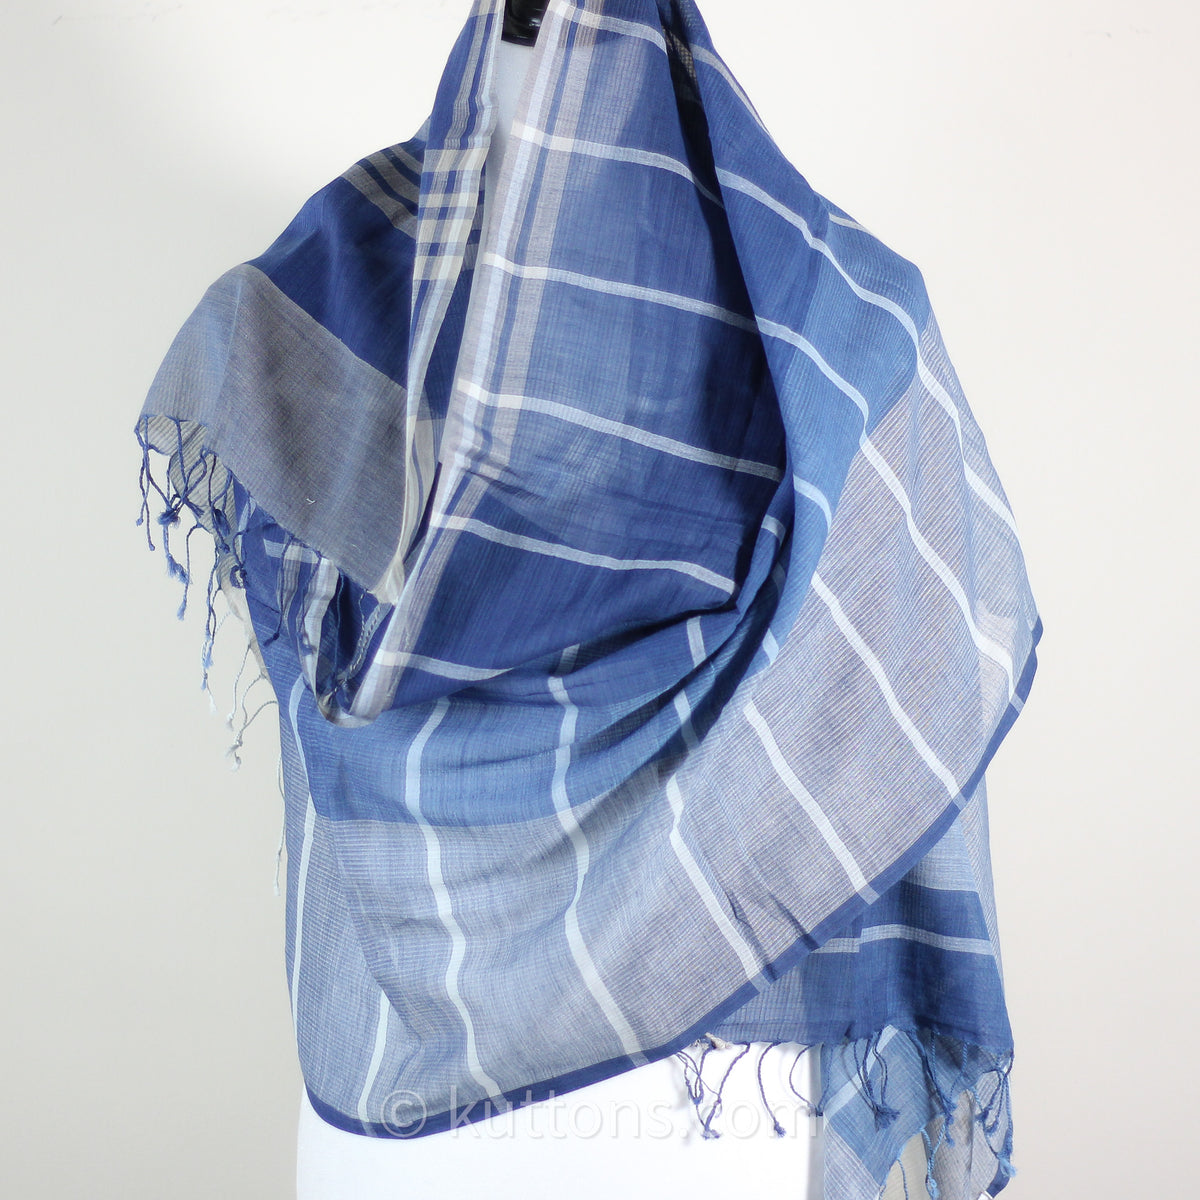 handmade cotton stole dyed with natural dyes